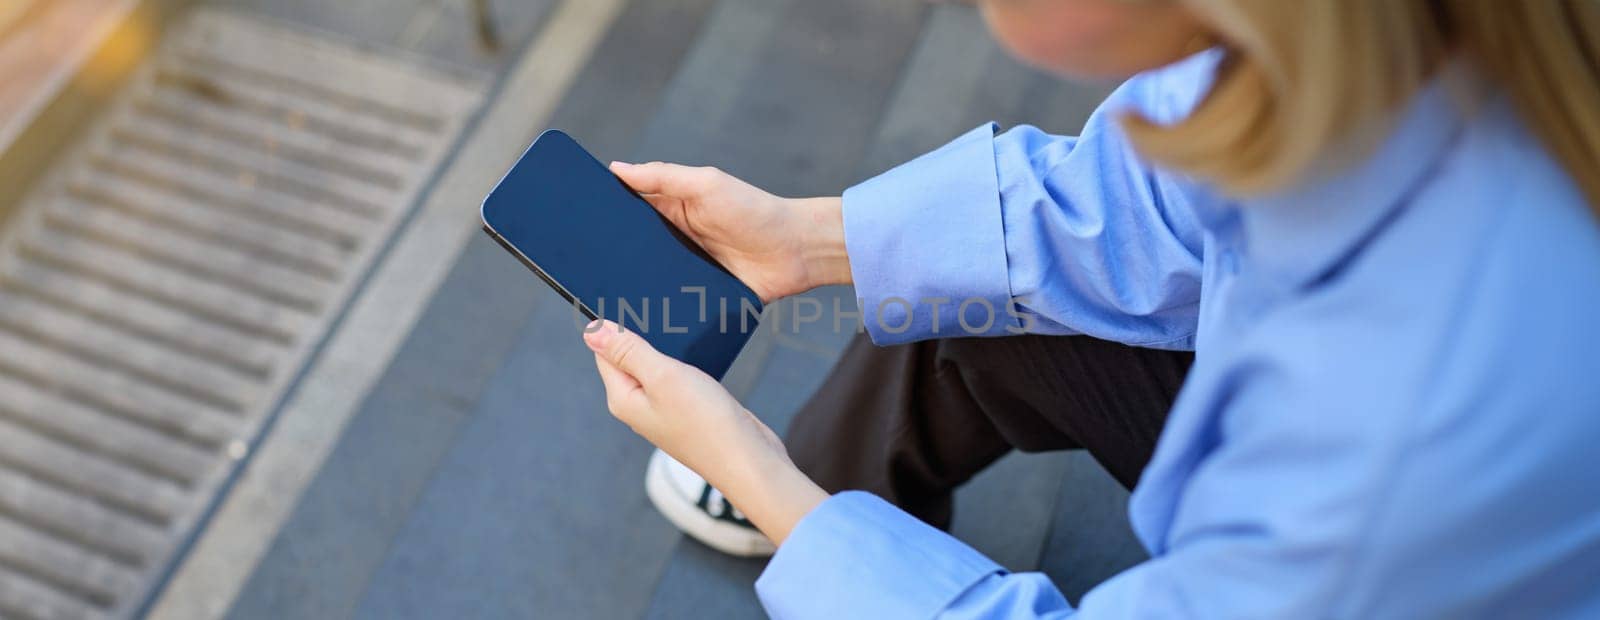 Shot from behind, young woman sitting on stairs on street, holding mobile phone in both hands, screen is dark and blank.